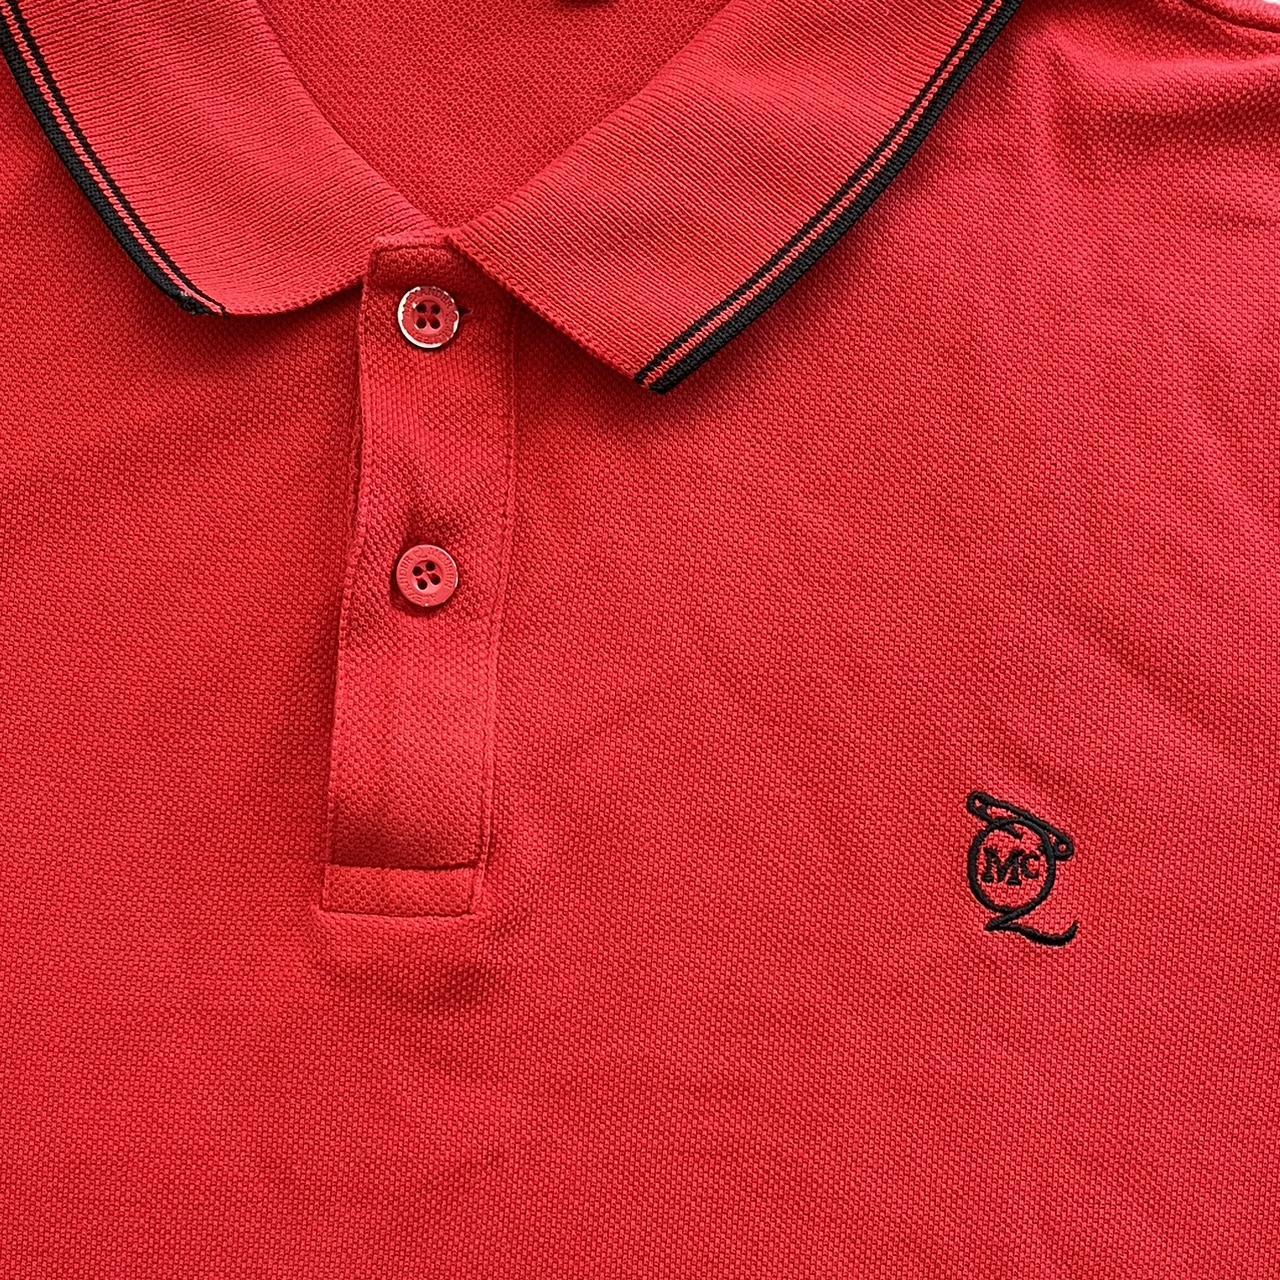 Alexander McQueen Men's Red and Black Polo-shirts | Depop